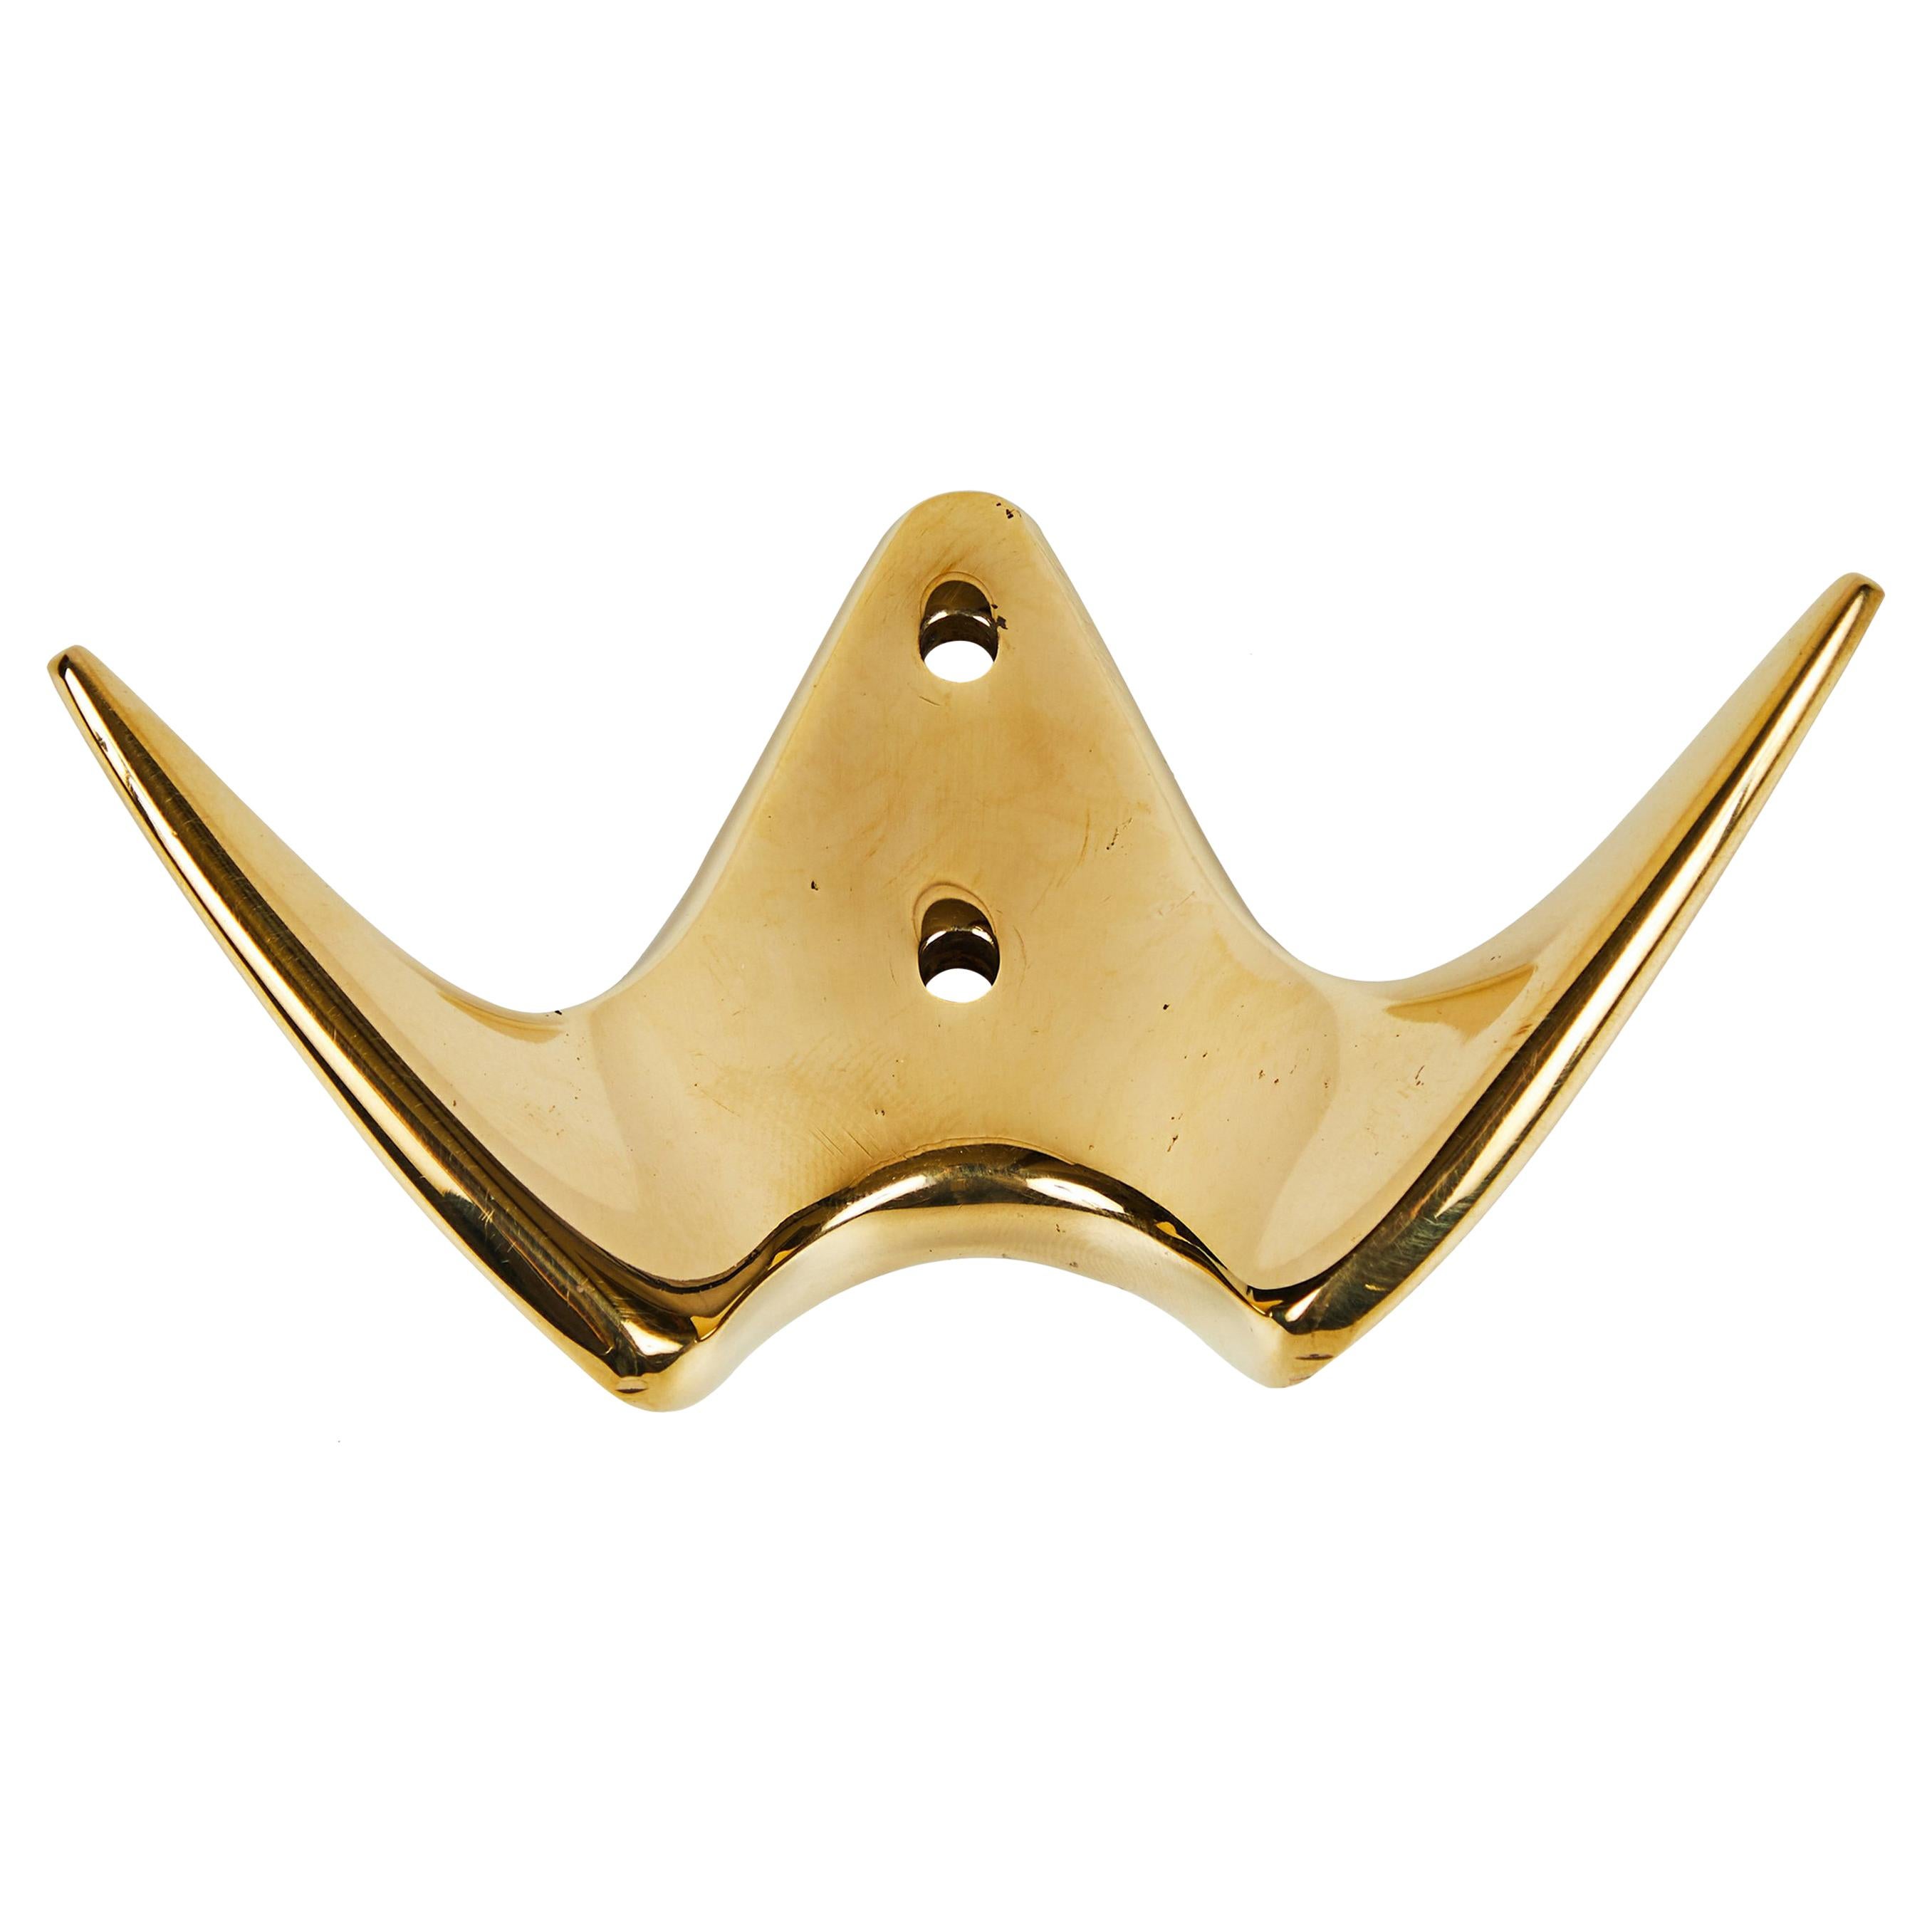 Carl Auböck #4995 patinated brass hook. Designed in the 1950s, this versatile and Minimalist Viennese hook is executed in polished and patinated brass by Werkstätte Carl Auböck, Austria.

Price is per item. Available in unlimited quantities. 

3